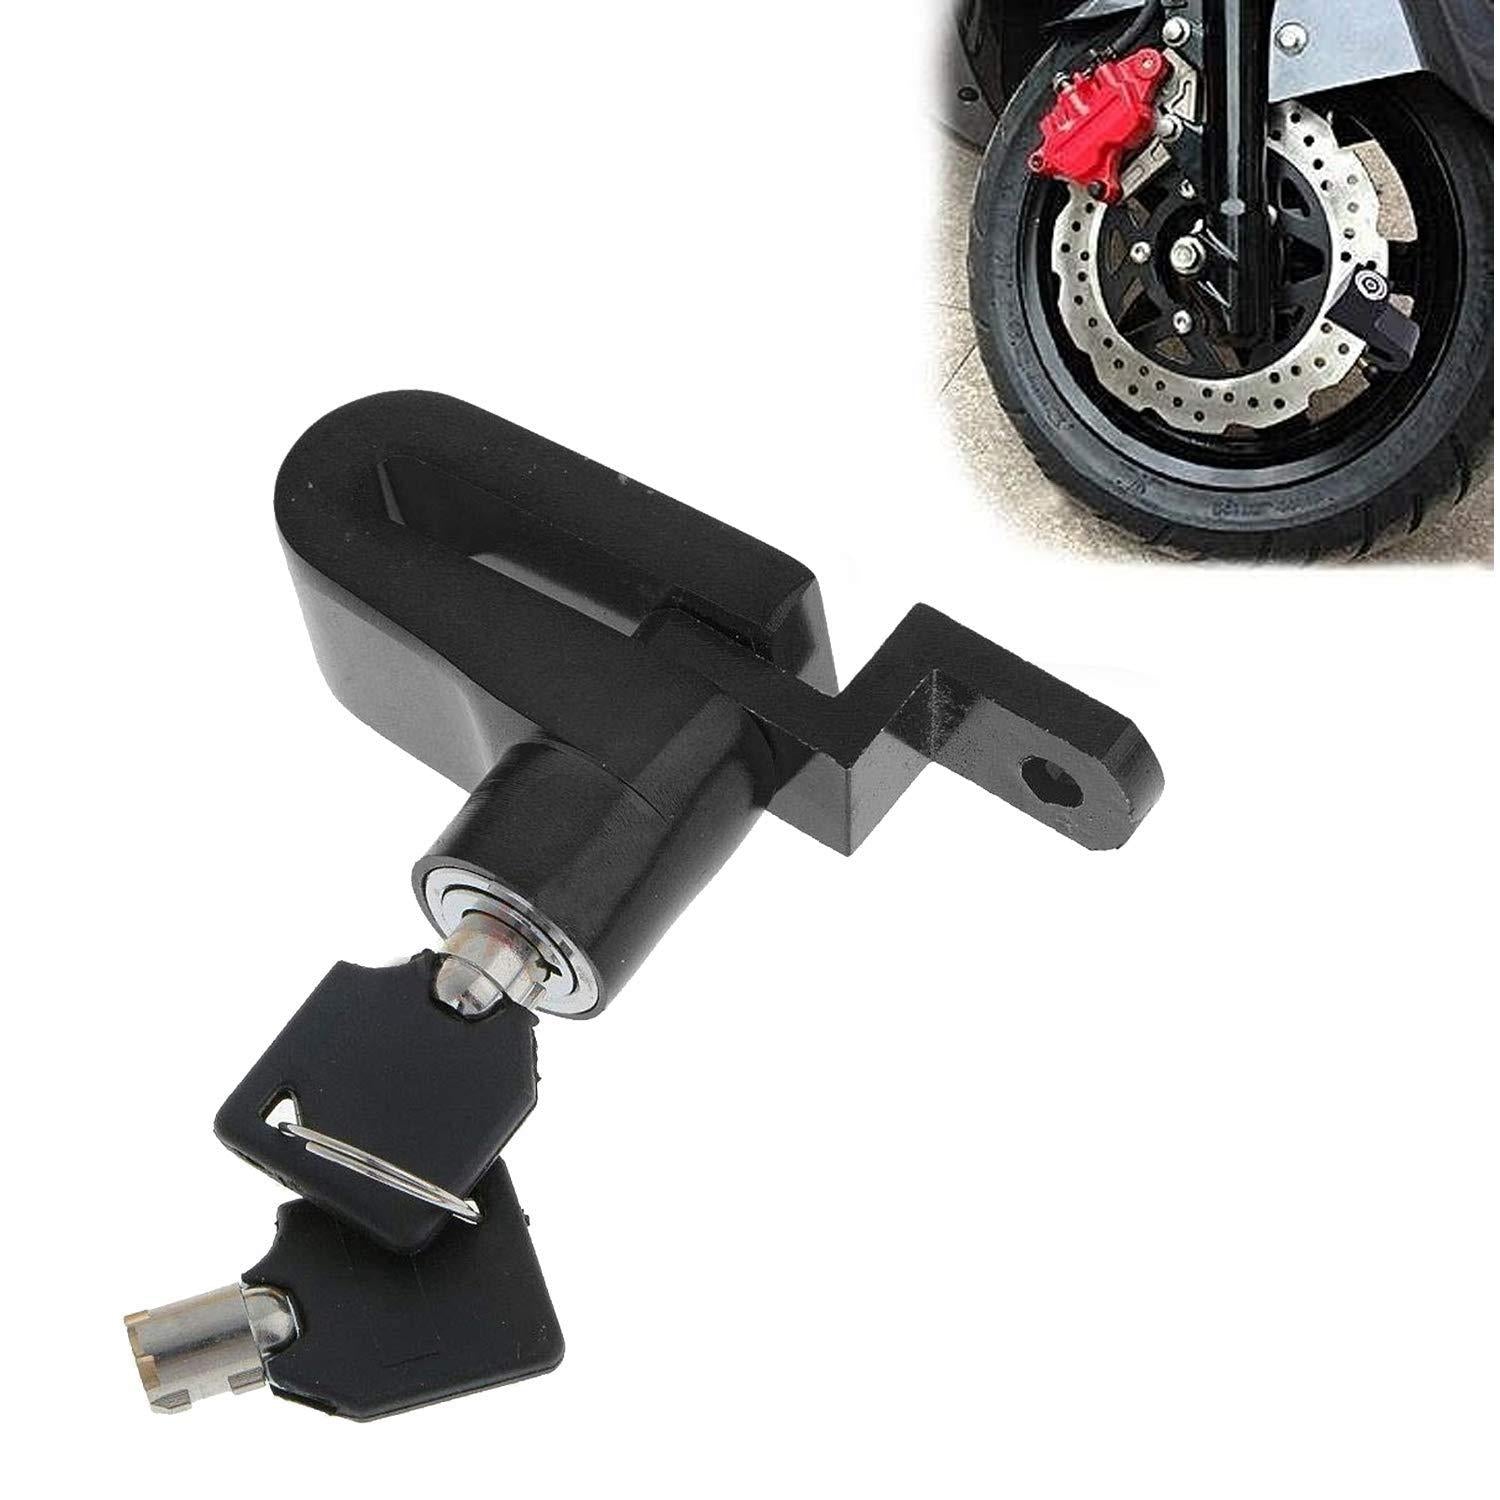 Mini Bicycle Motorcycle Disc Brake Lock (Assorted Colour)